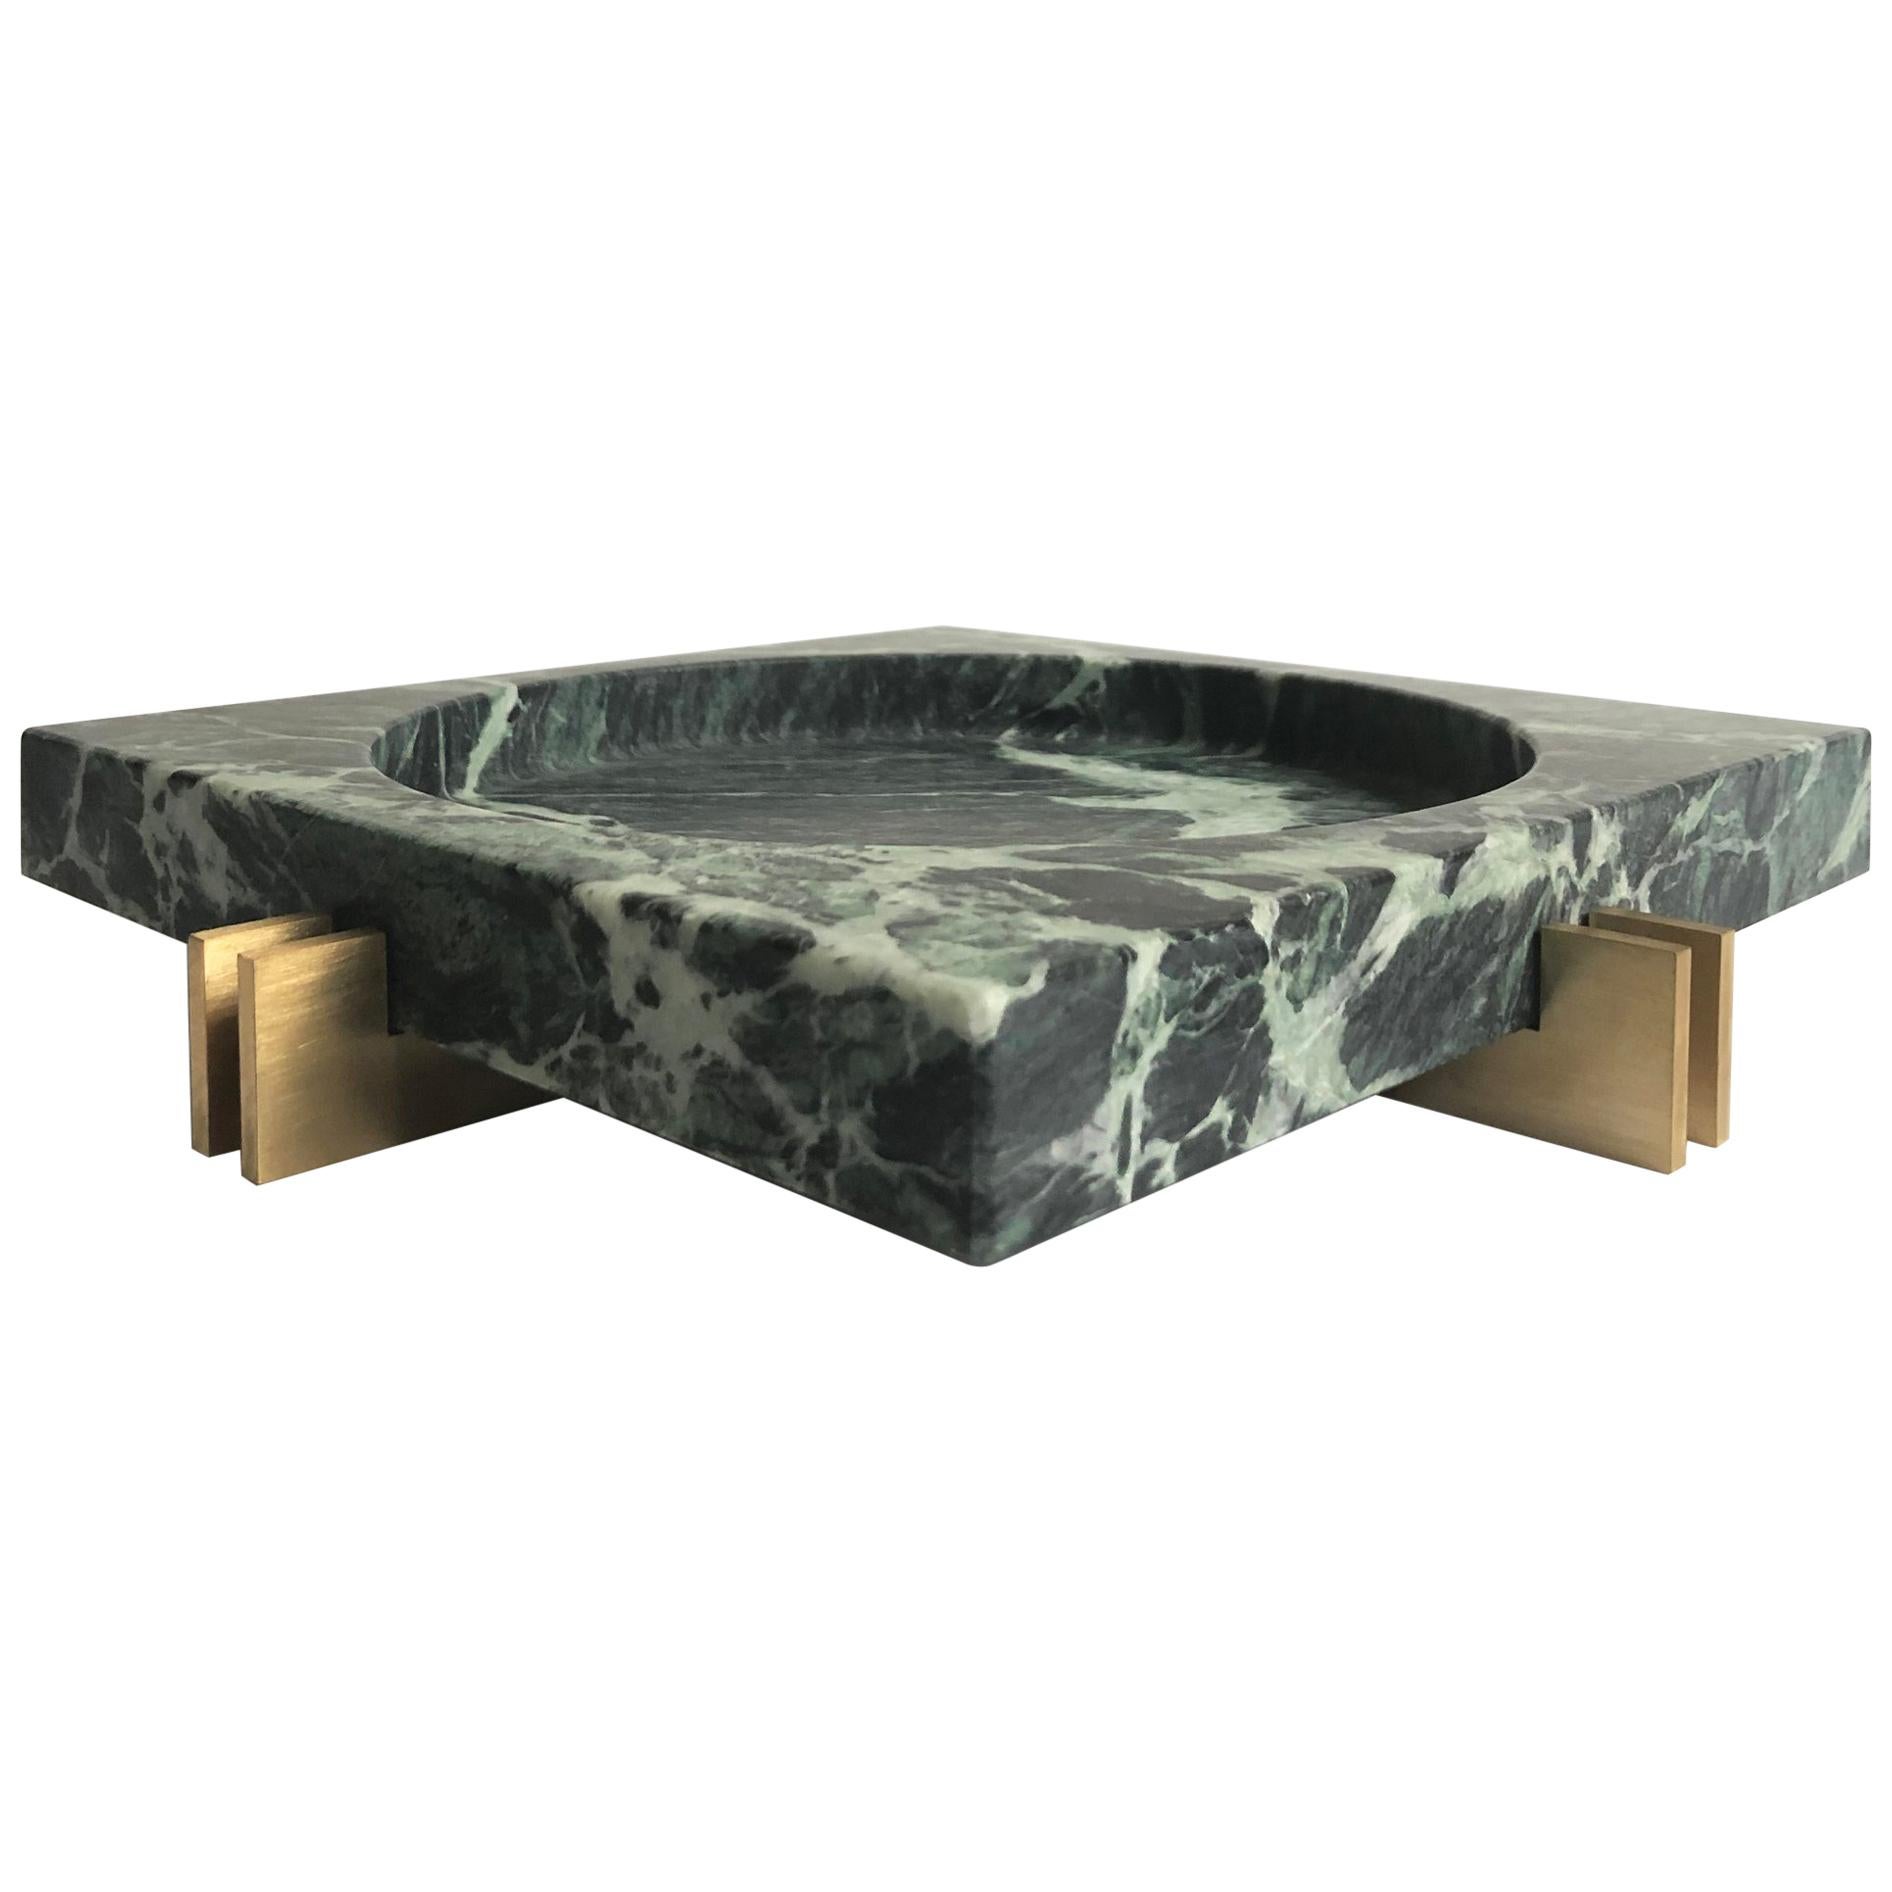 Parallel Bowl in Verde Marble For Sale